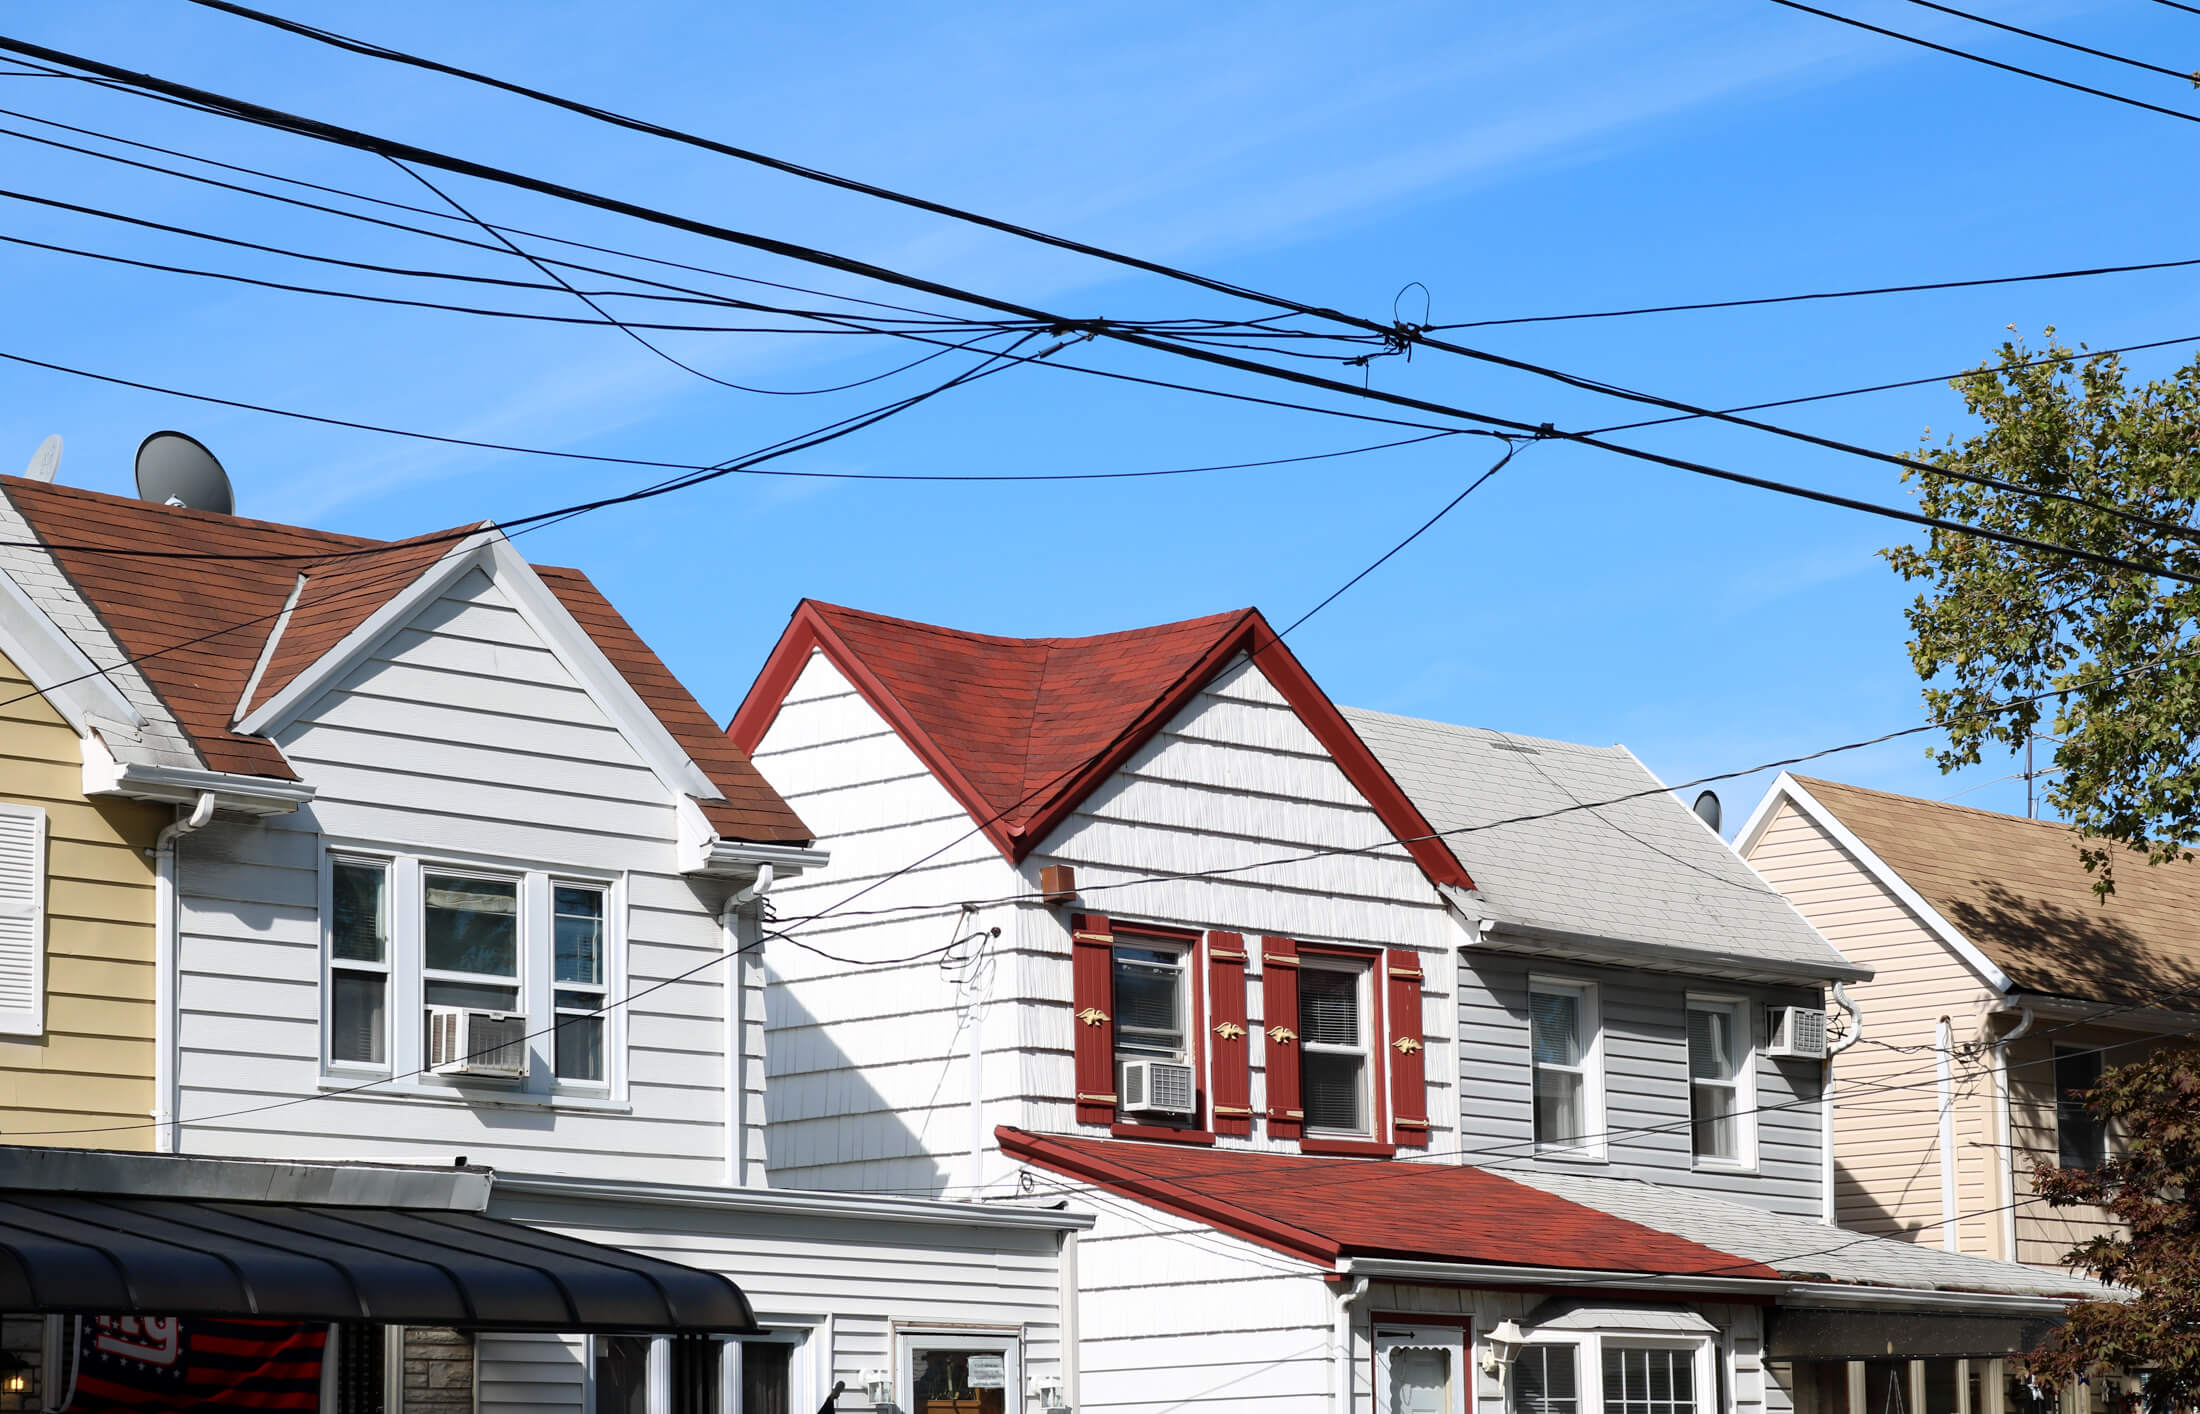 brooklyn - telephone wires in front of vinyl sided houses